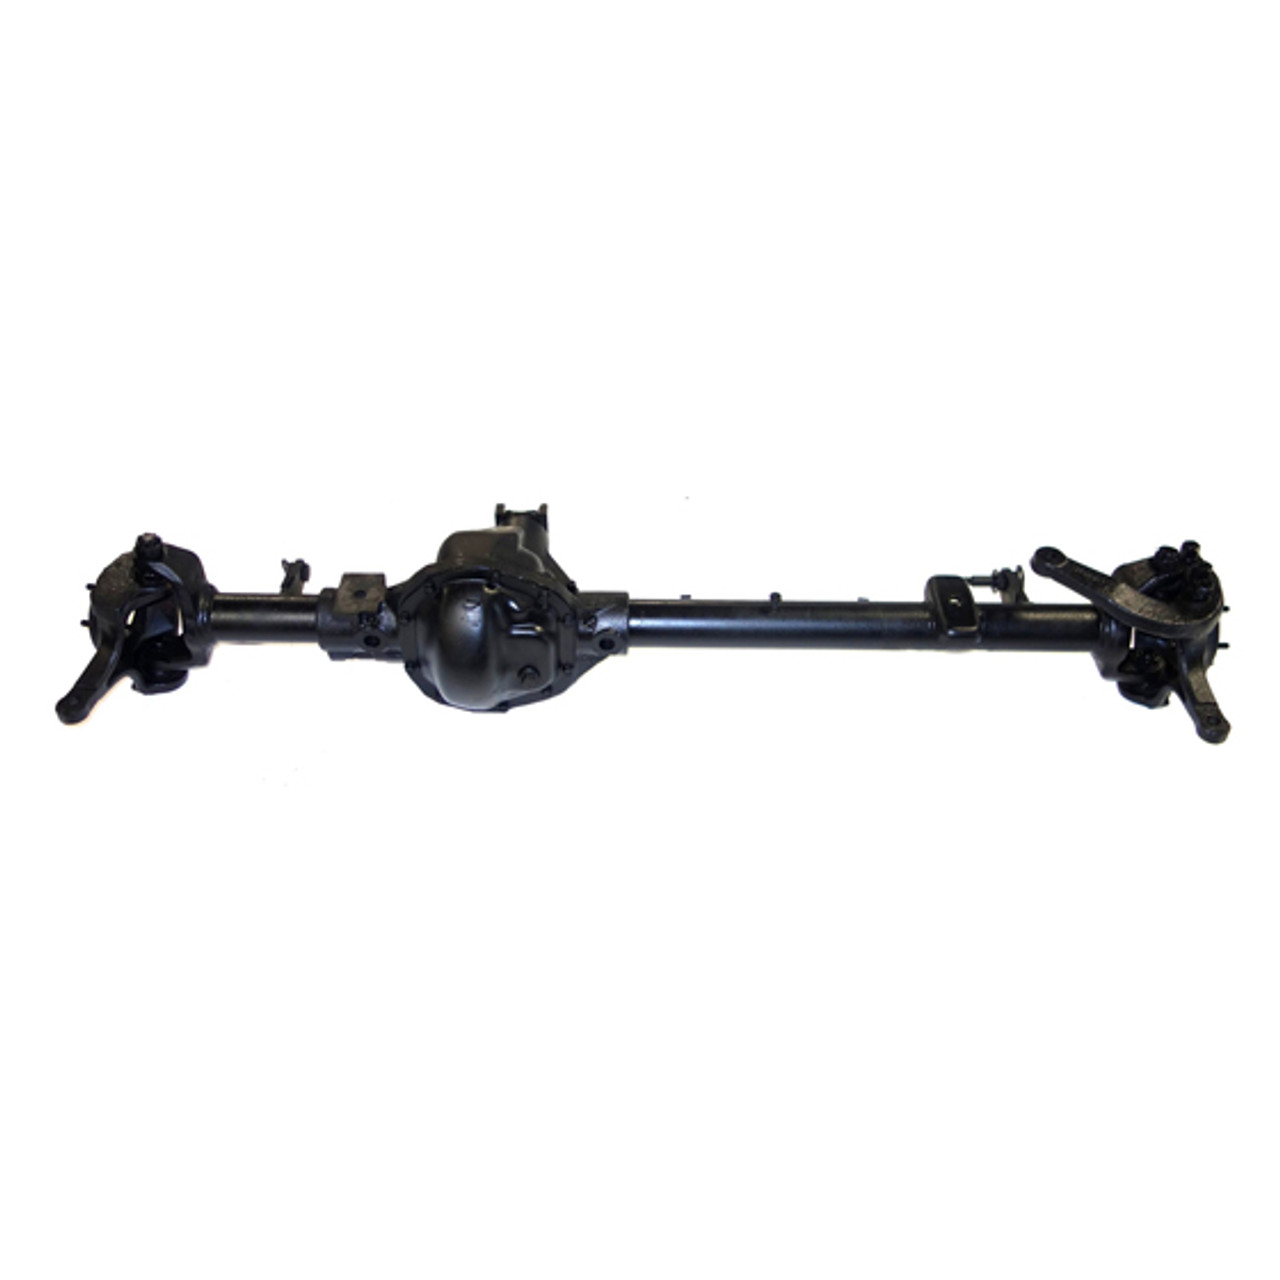 Reman Complete Axle Assembly for Dana 44 1998 Dodge Ram 1500 3.90 Ratio with Rear Wheel ABS